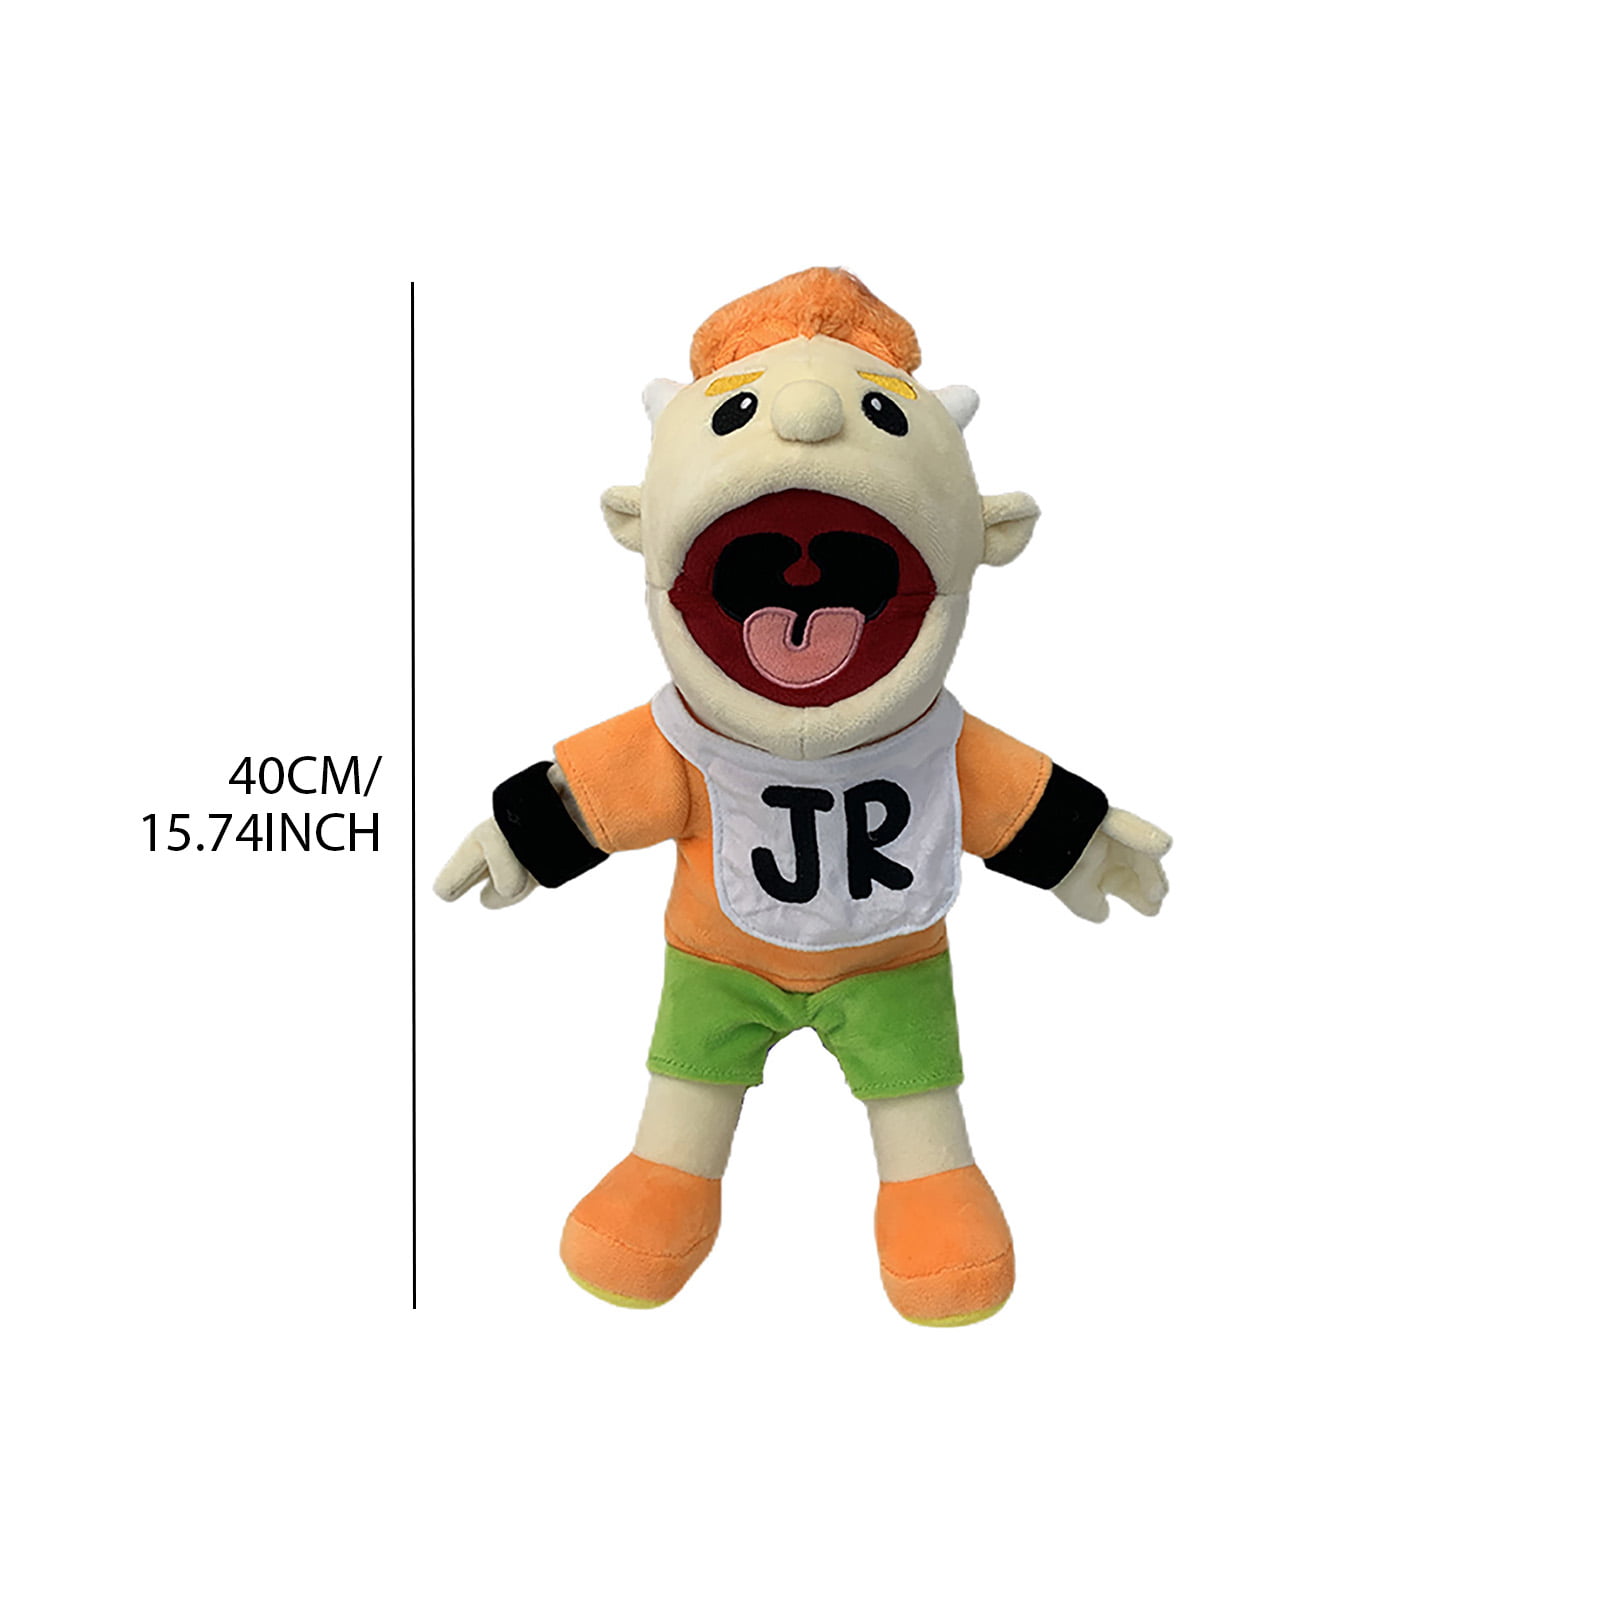 1* Jeffy Puppet Soft Plush Toy Hand Puppet for Play House Mischievous Finger